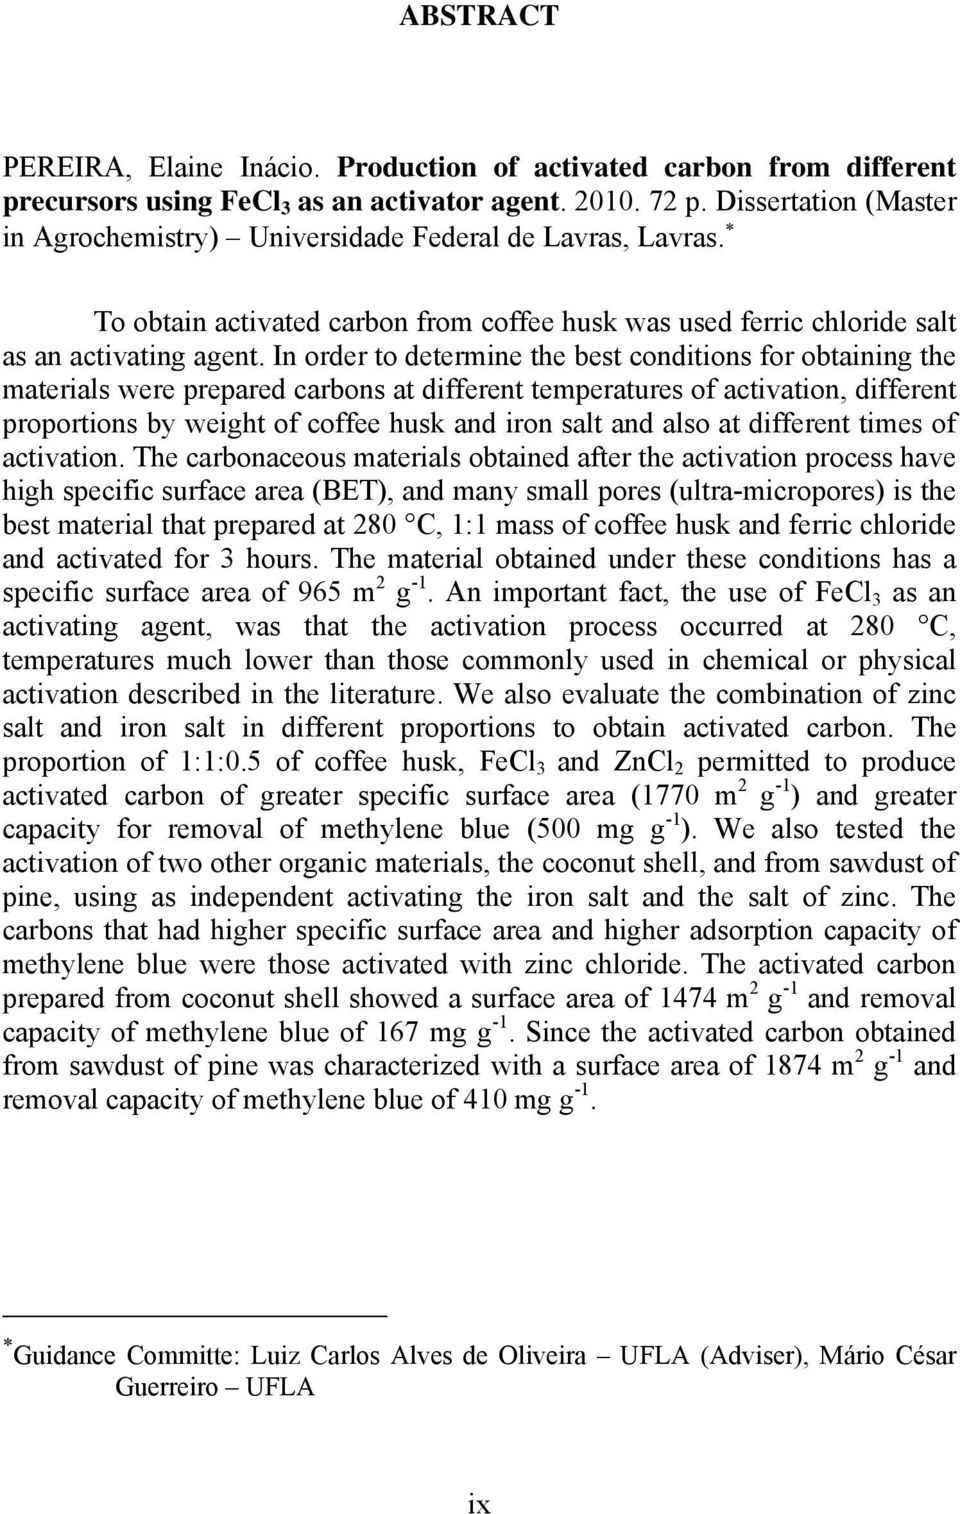 In order to determine the best conditions for obtaining the materials were prepared carbons at different temperatures of activation, different proportions by weight of coffee husk and iron salt and